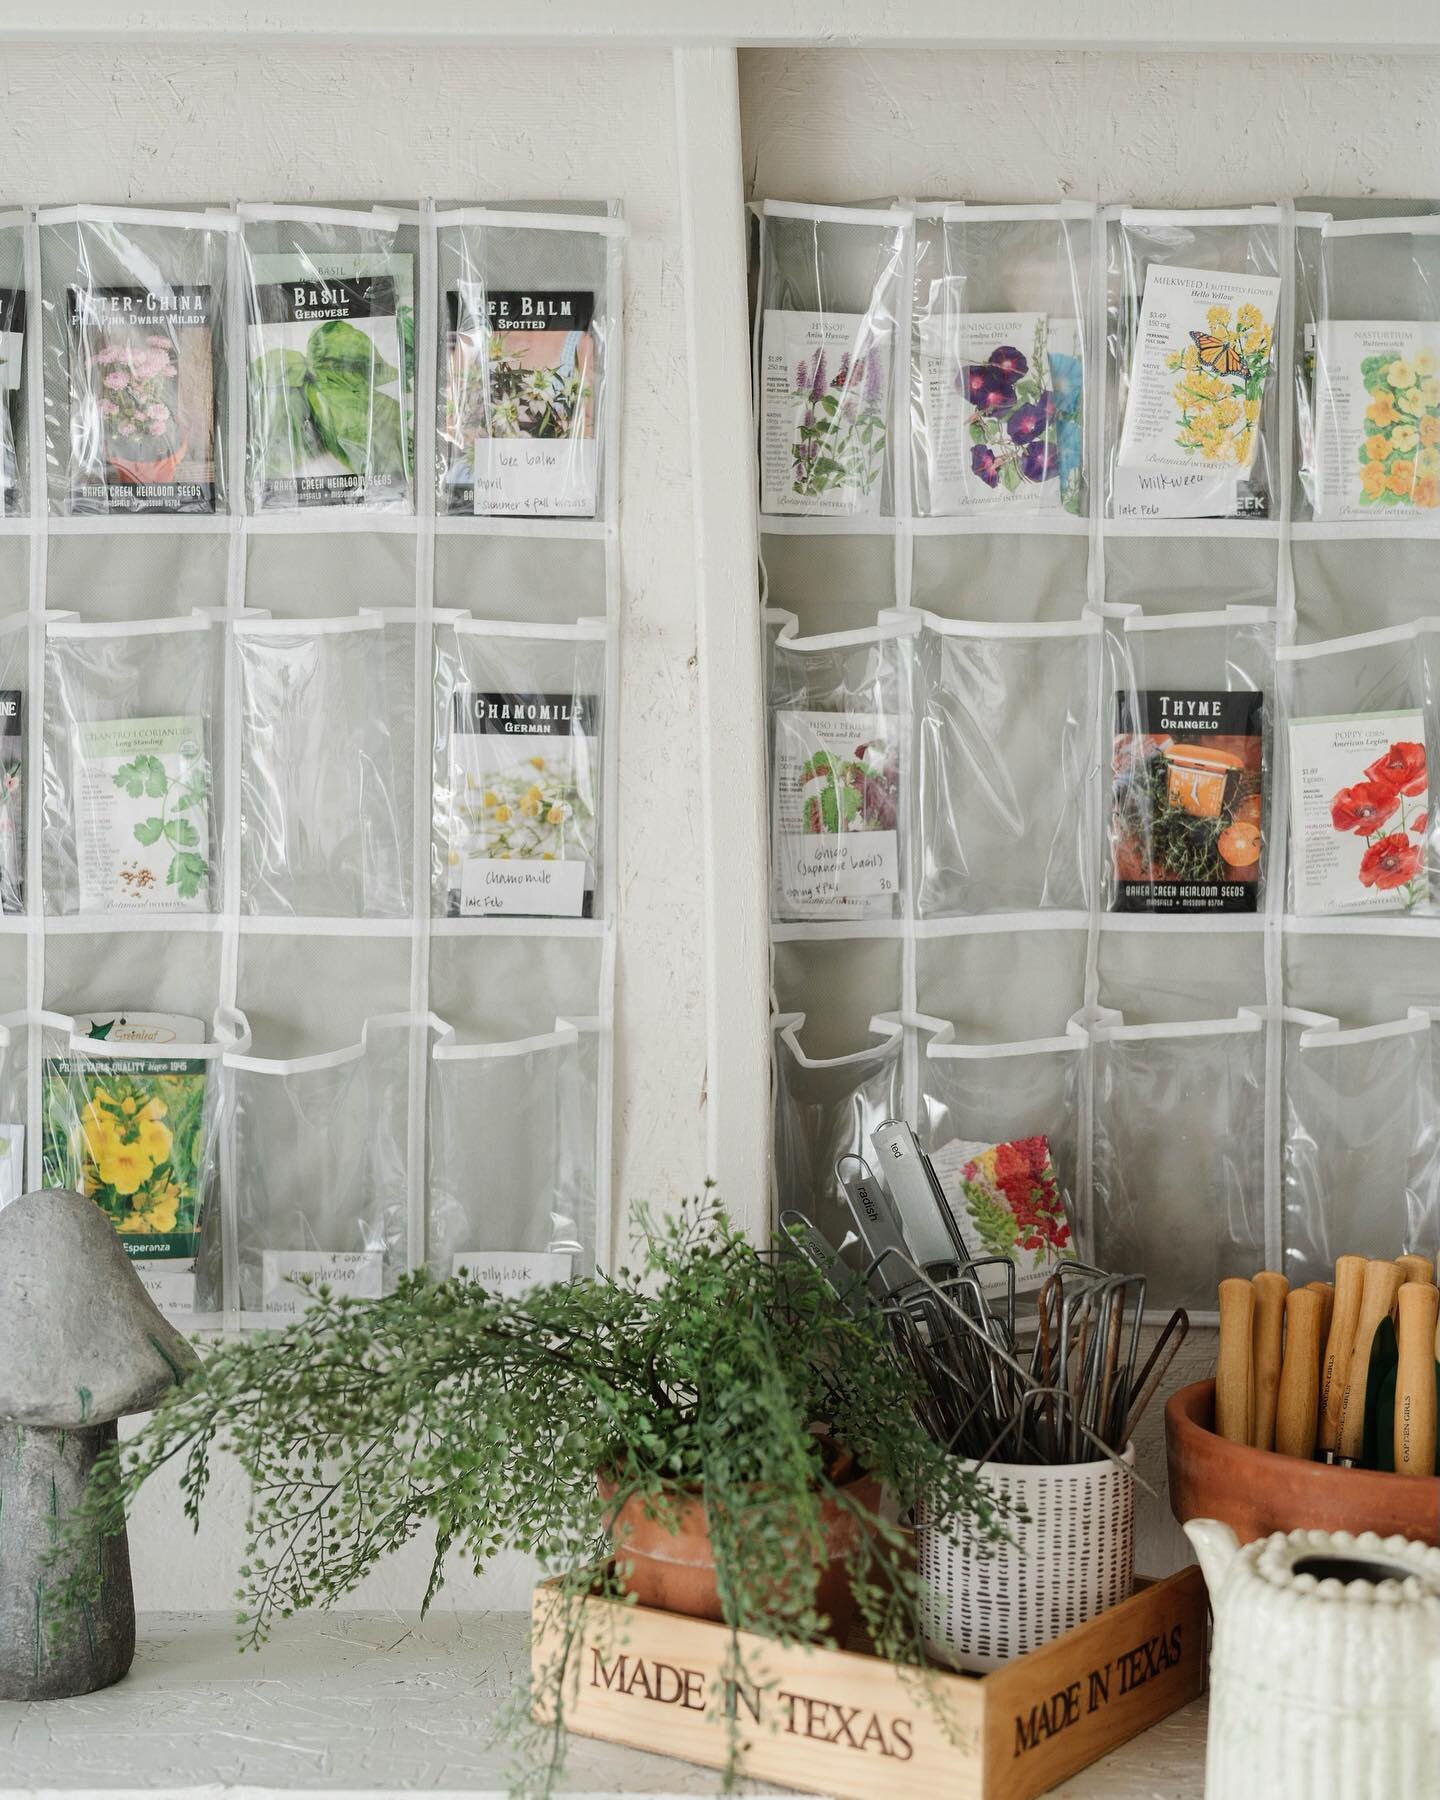 Need an indoor garden chore in this heat?  It&rsquo;s always a good idea to organize.  Look how @jenmcdhome spruced up her garden shed. 

Using shoe holders to organize seeds is brilliant.  You may notice that we use a lot of @bakercreekseeds in our 